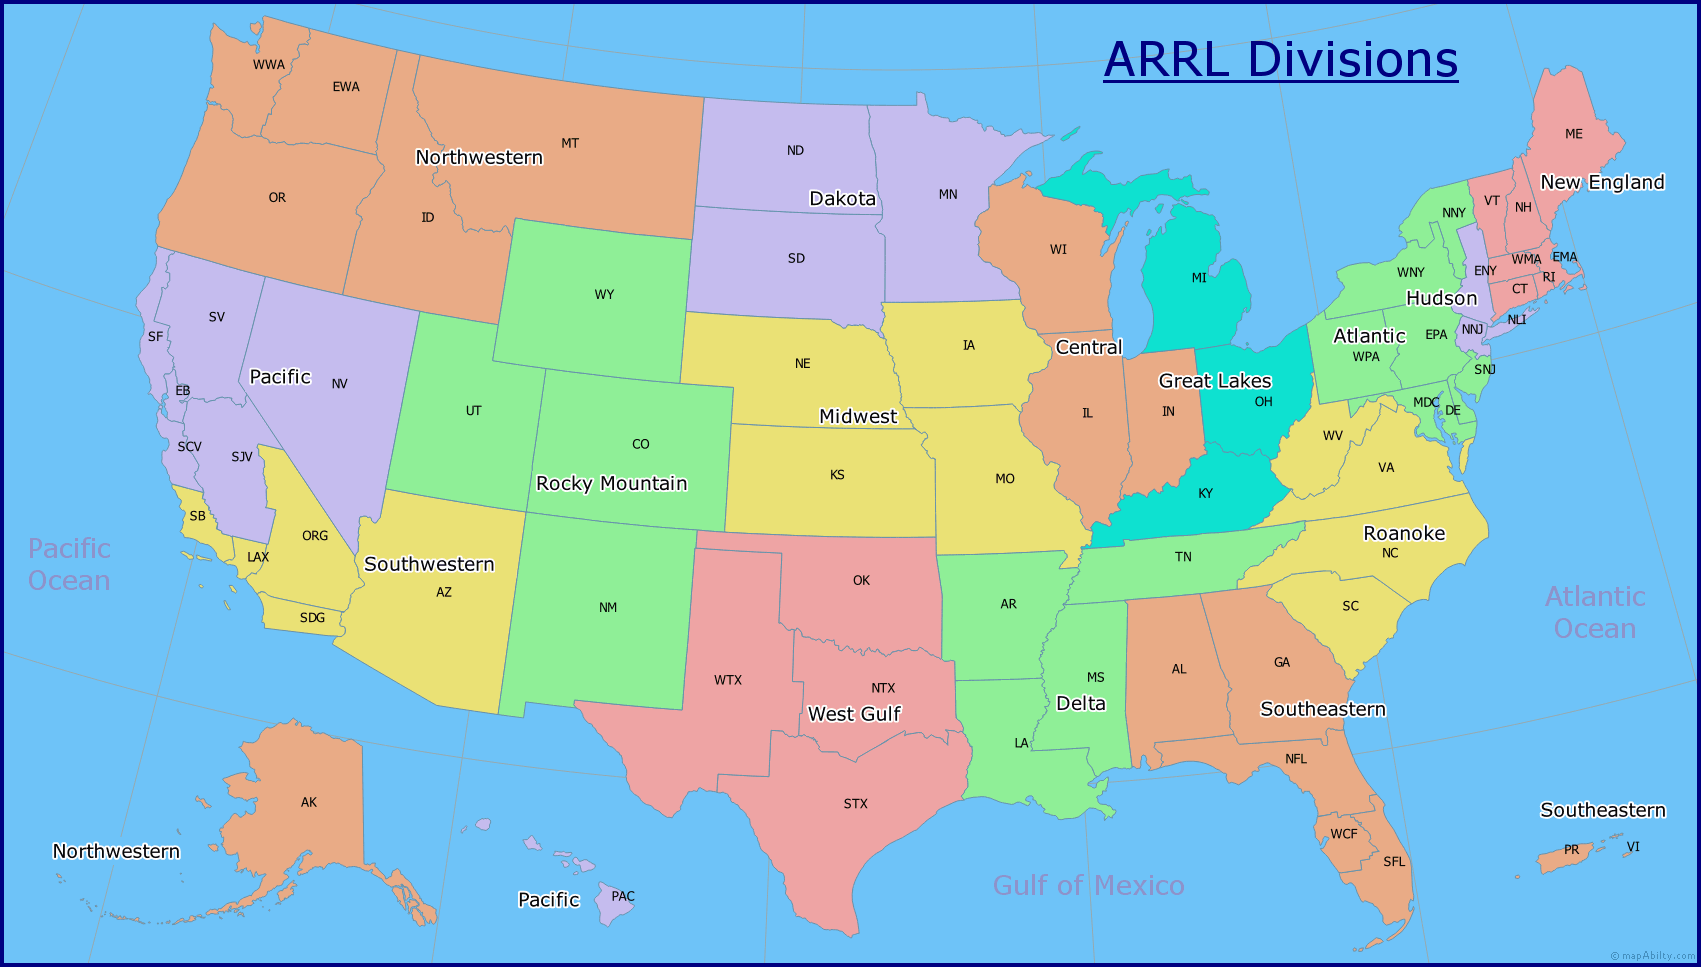 ARRL divisions map from https://www.mapability.com/ei8ic/maps/arrl_divisions.php